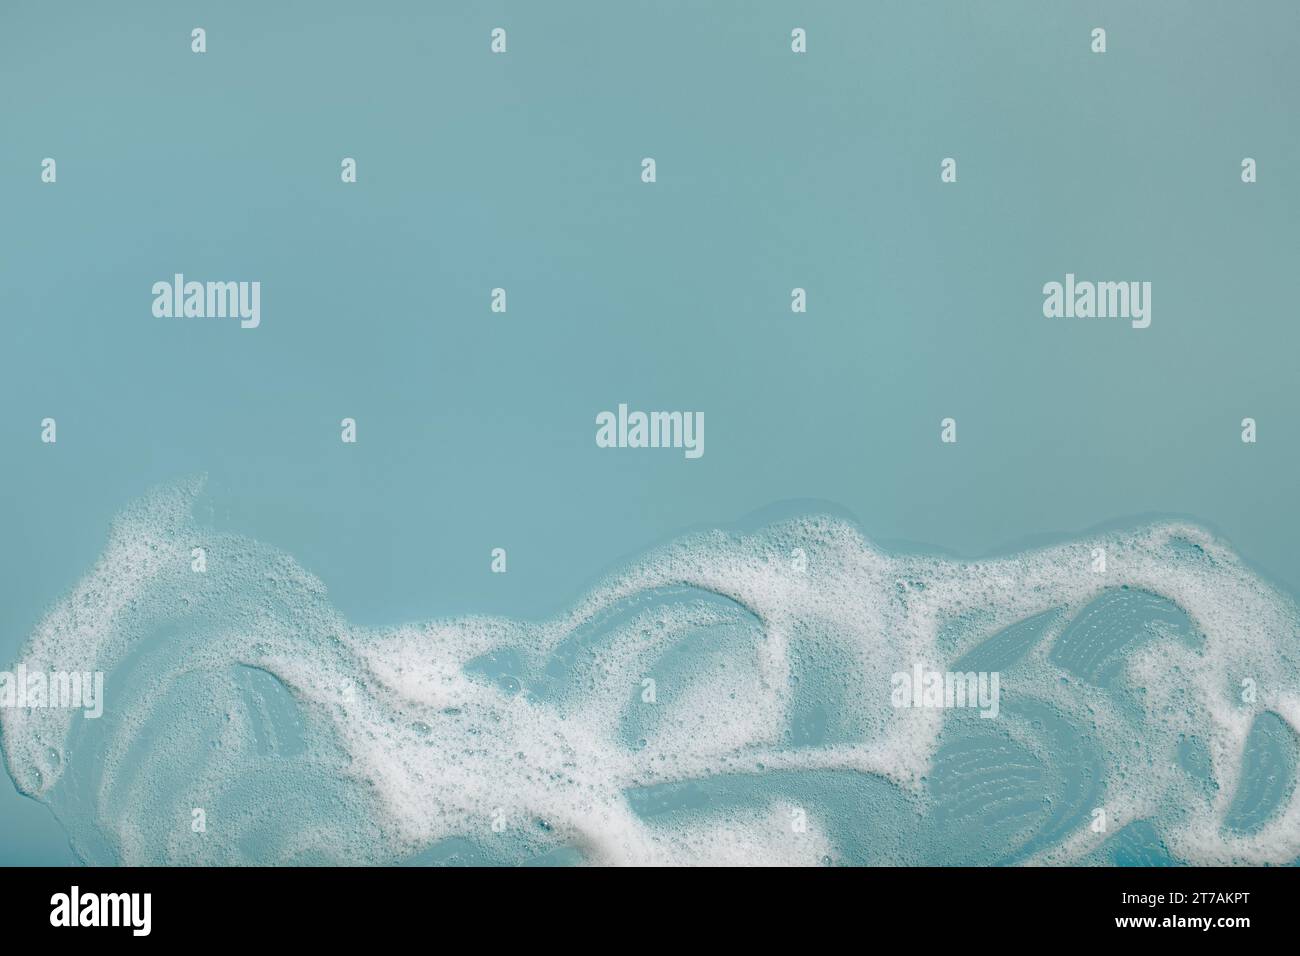 foam soap suds on green background, laundry cleaning washing concept Stock Photo